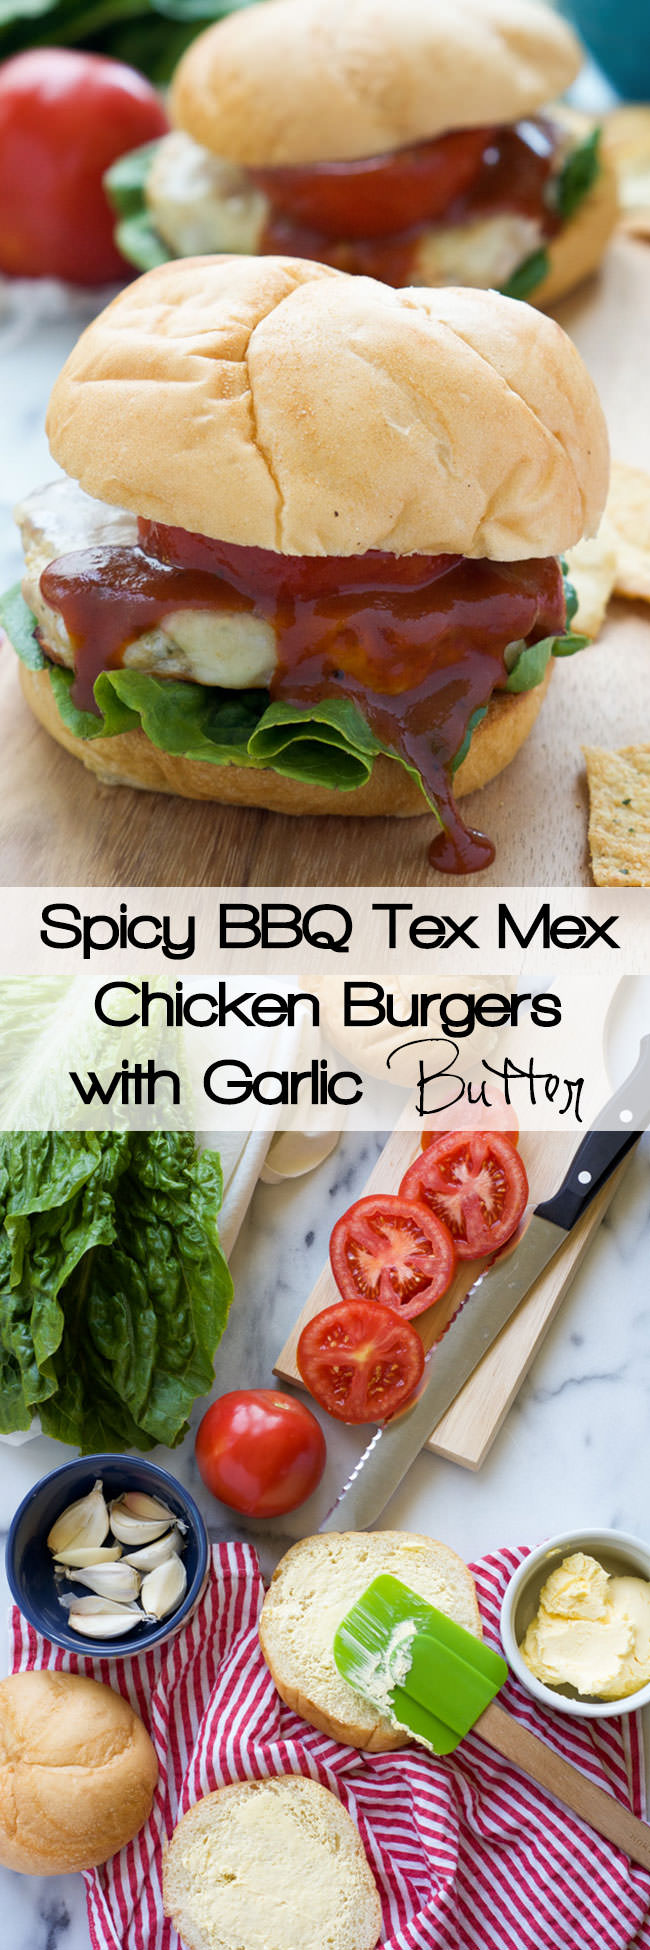 These Spicy BBQ Tex Mex Chicken Burgers are grilled to perfection and topped with spicy pepperjack cheese, juicy tomato and finished with a tangy BBQ ketchup. 